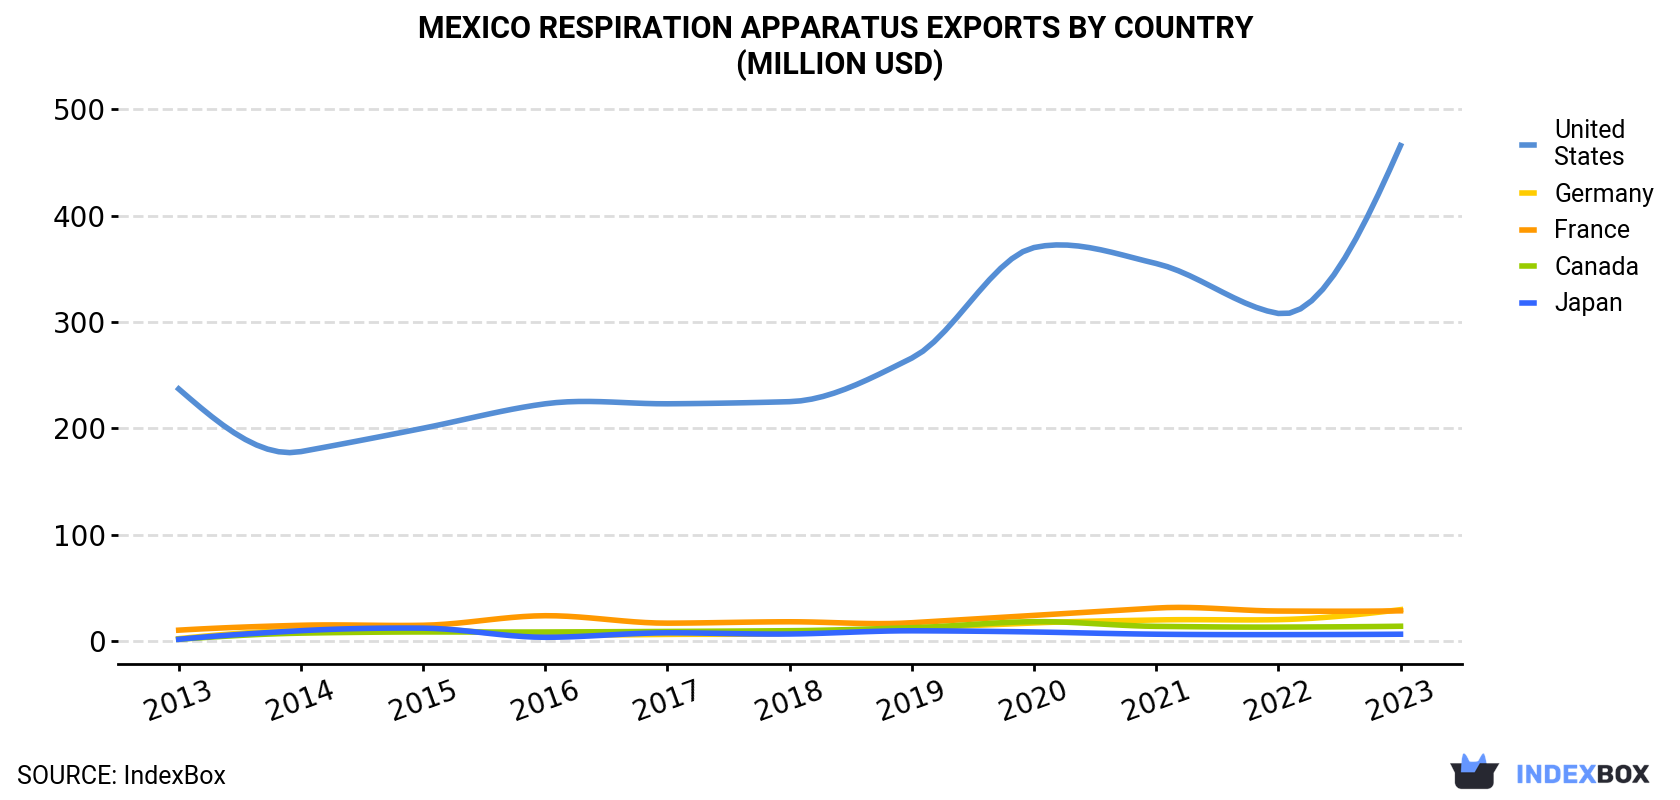 Mexico Respiration Apparatus Exports By Country (Million USD)